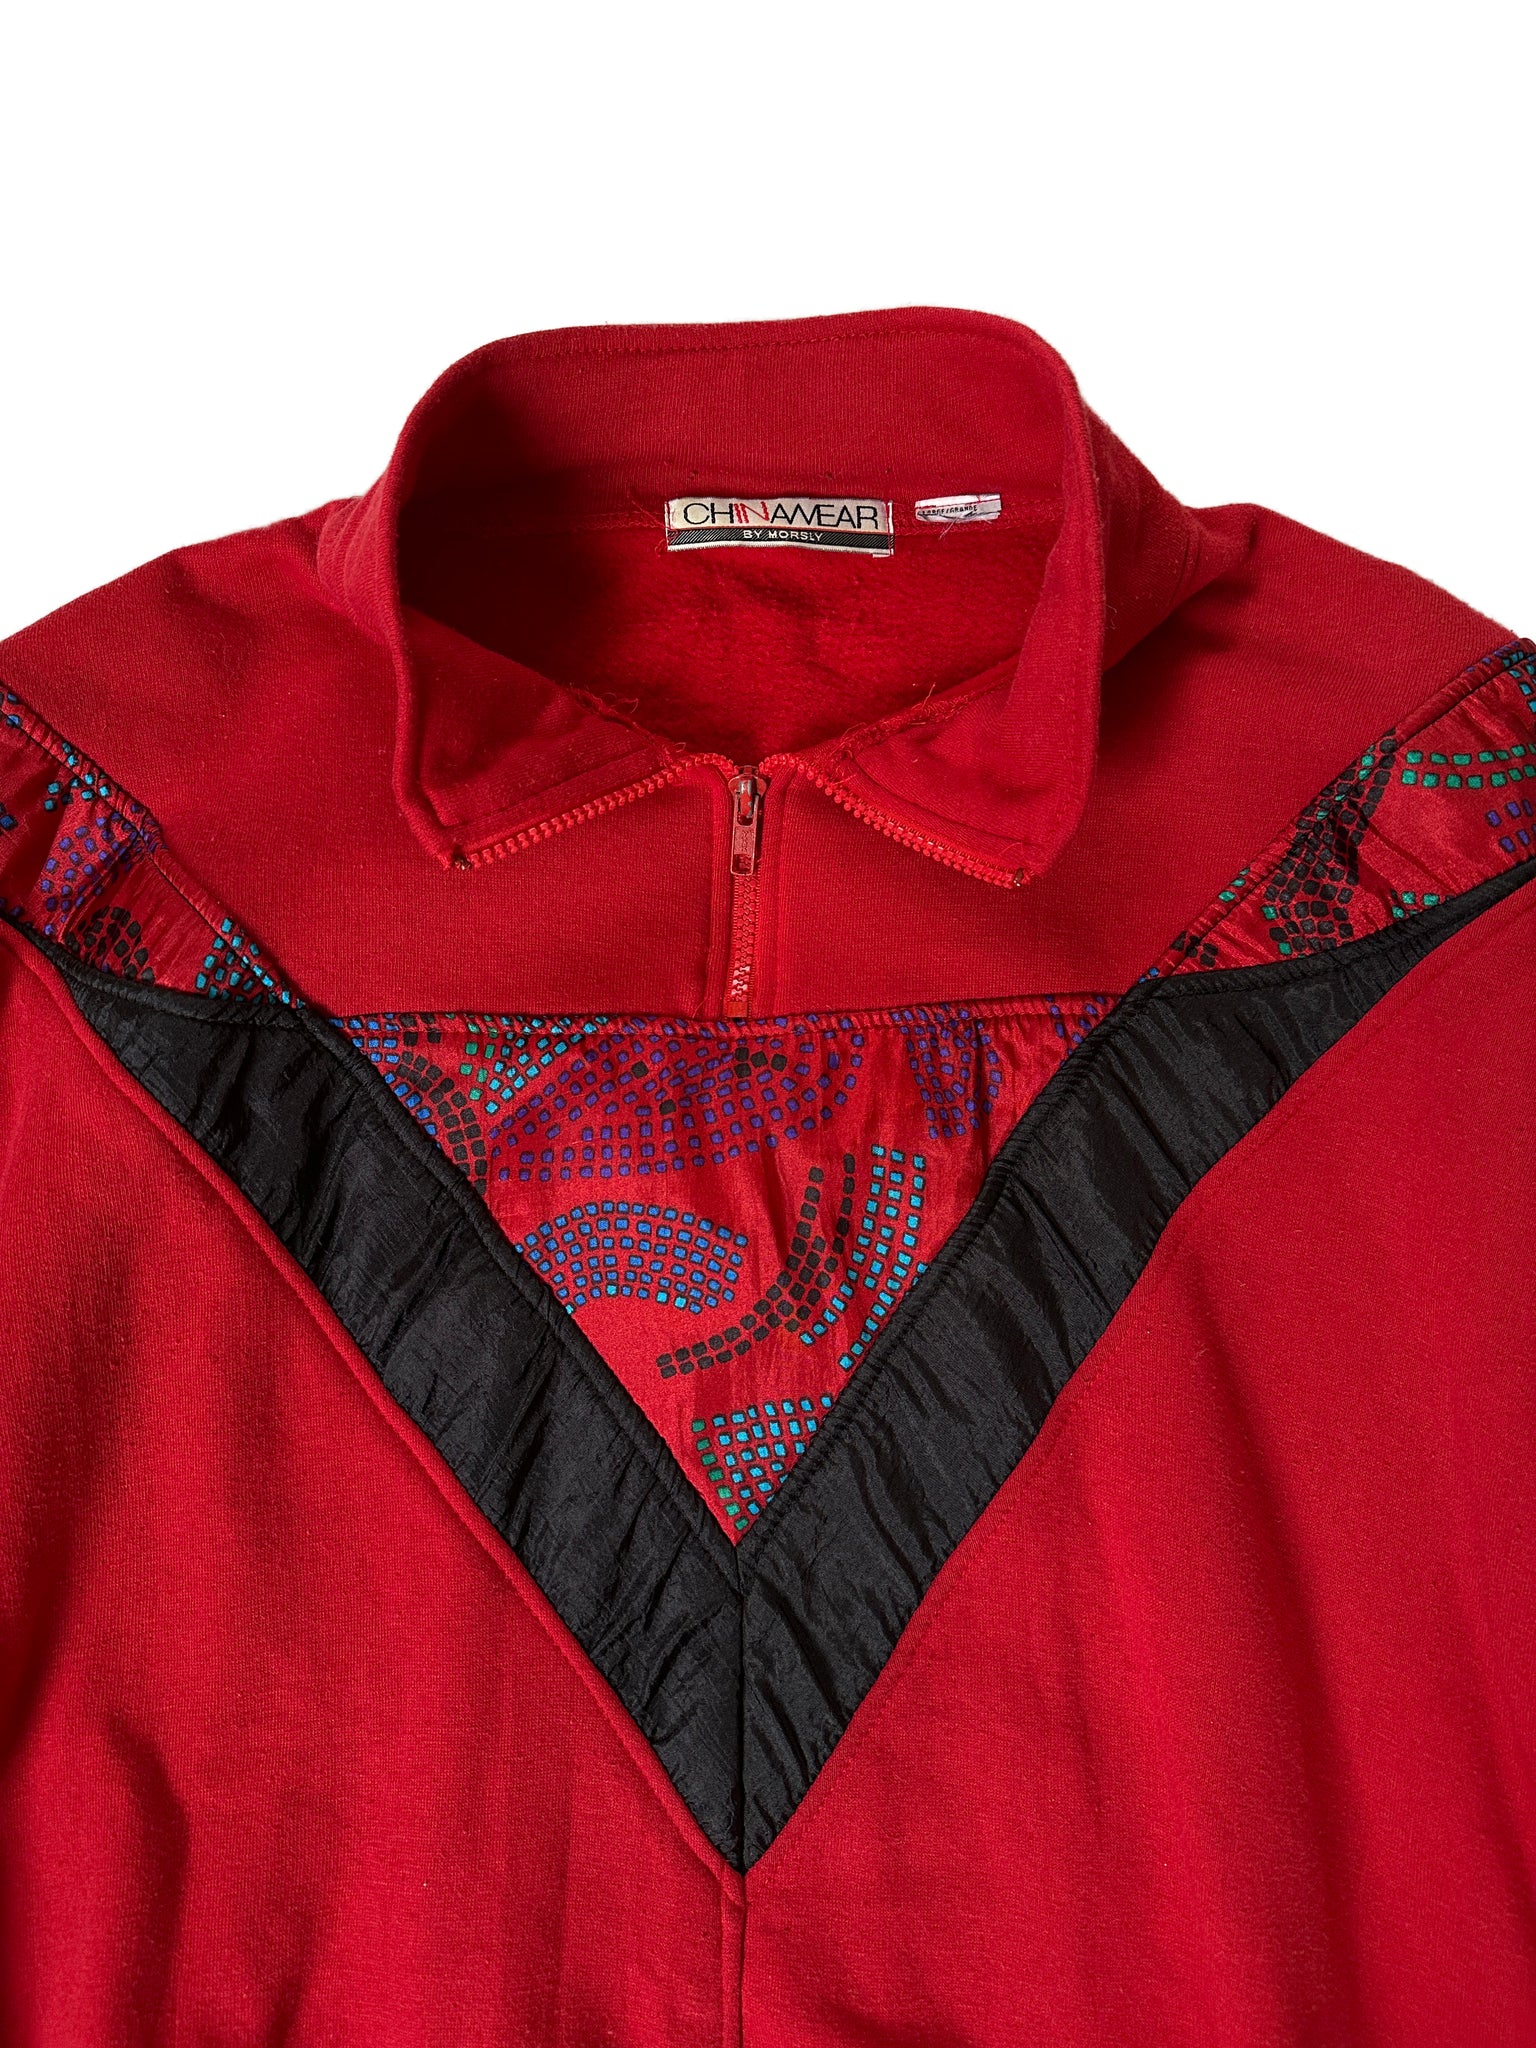 chinawear pullover